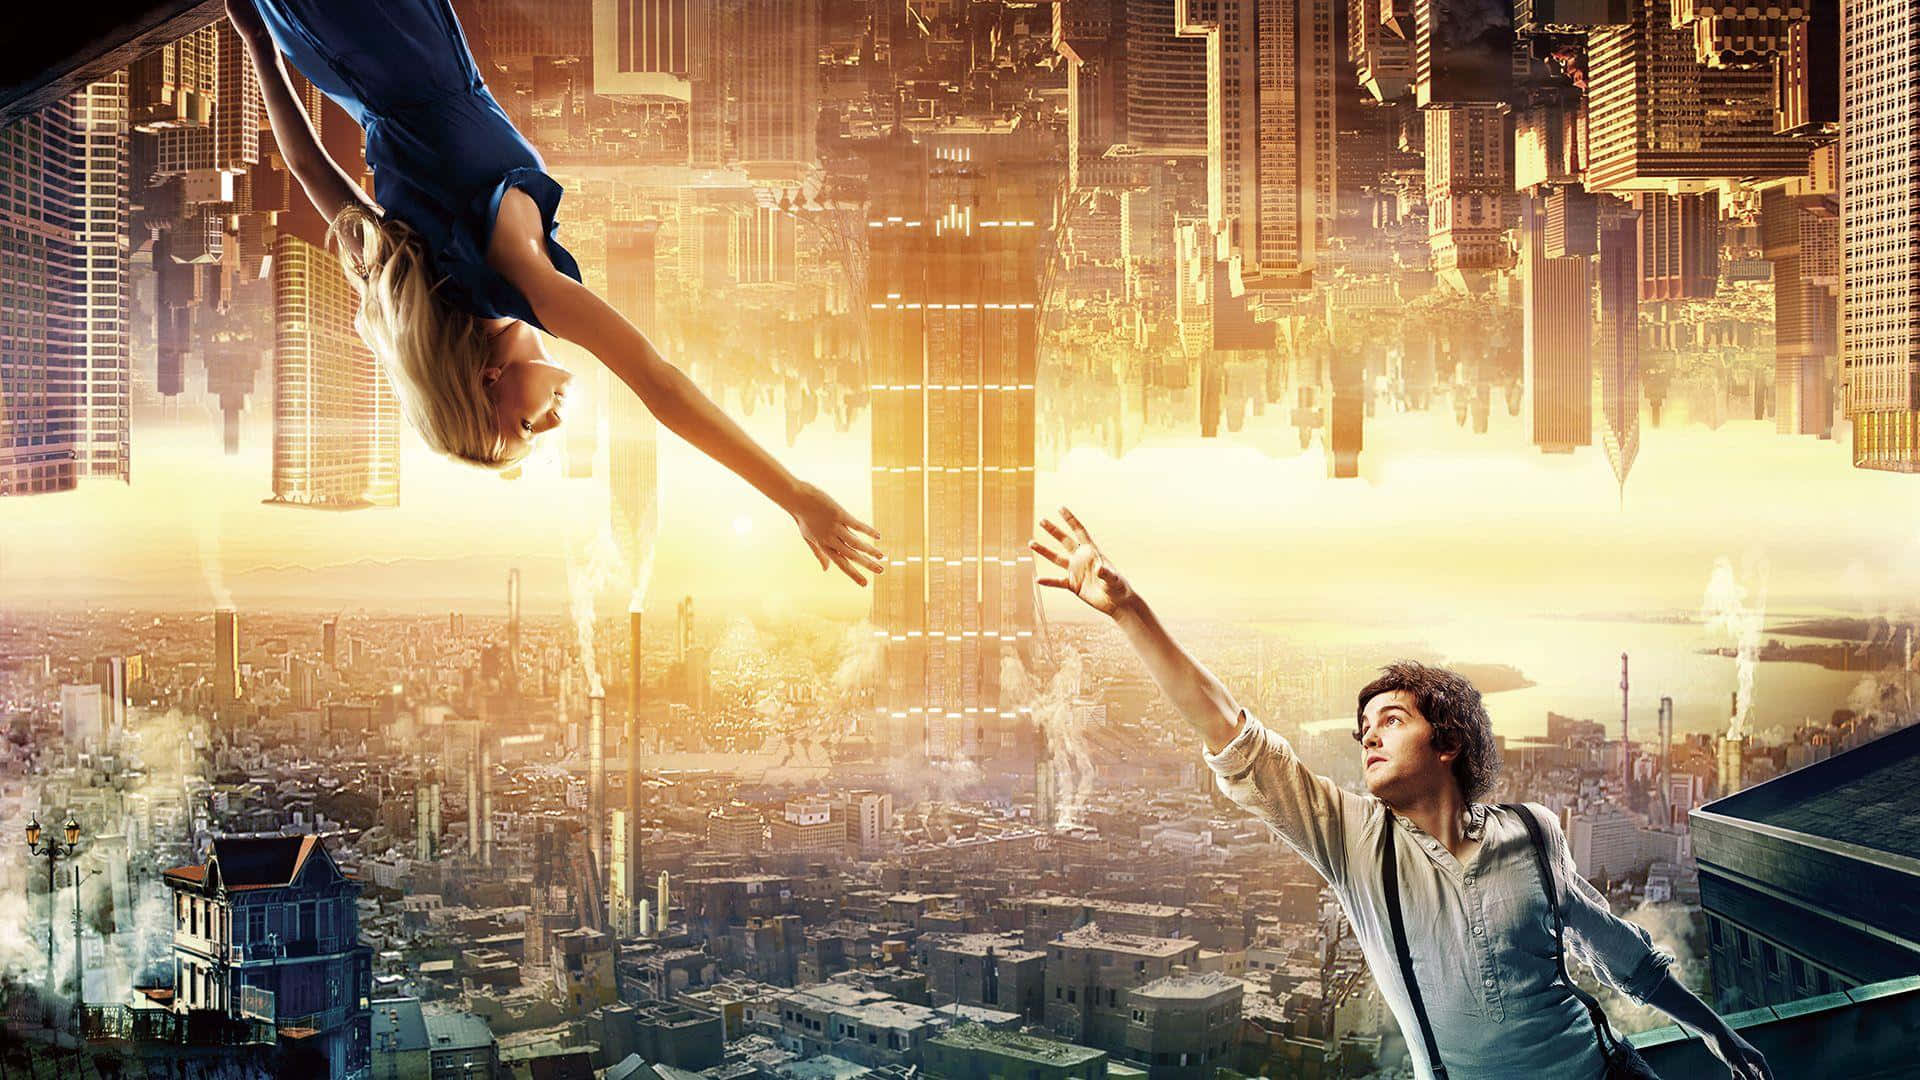 A Man And Woman Are Flying Over A City